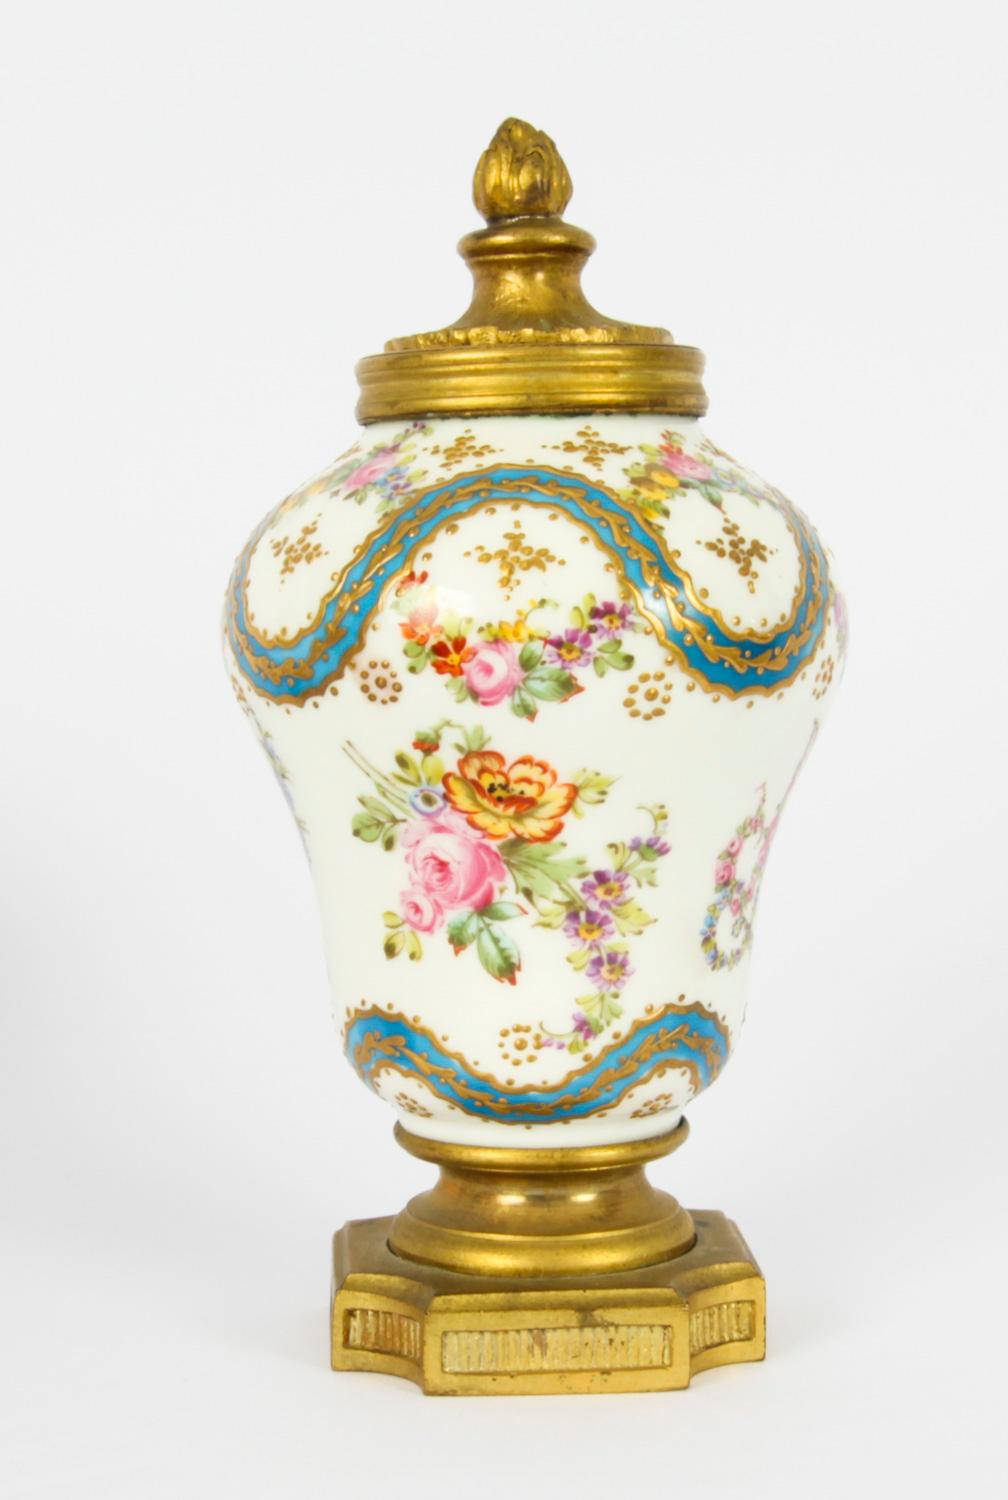 This is a beautiful antique small pair of French Sevres porcelain and ormolu mounted lidded vases, in the Louis XV manner, mid 19th century in date.

The vases are of baluster form and are superbly painted with the monogram of Marie Antoinette